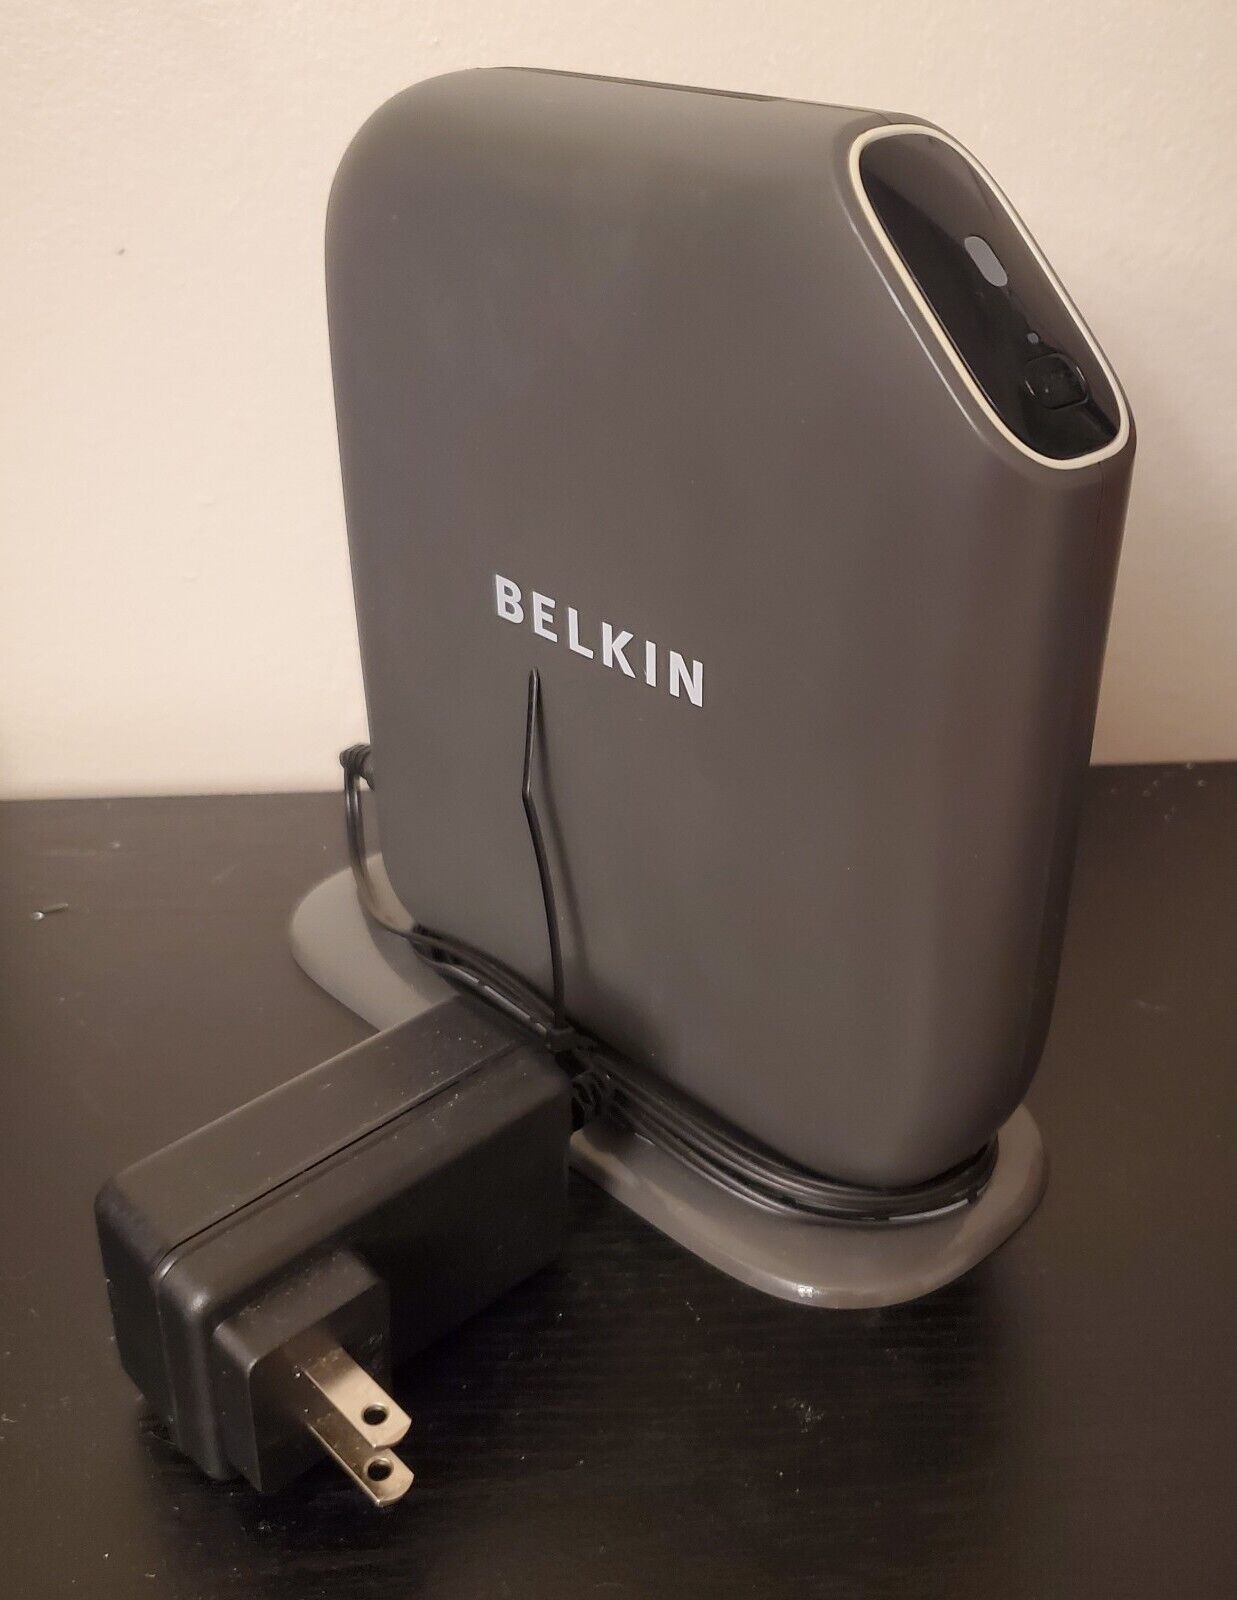 Belkin Play Wireless N Router Model #F7D4302 v1 with plug